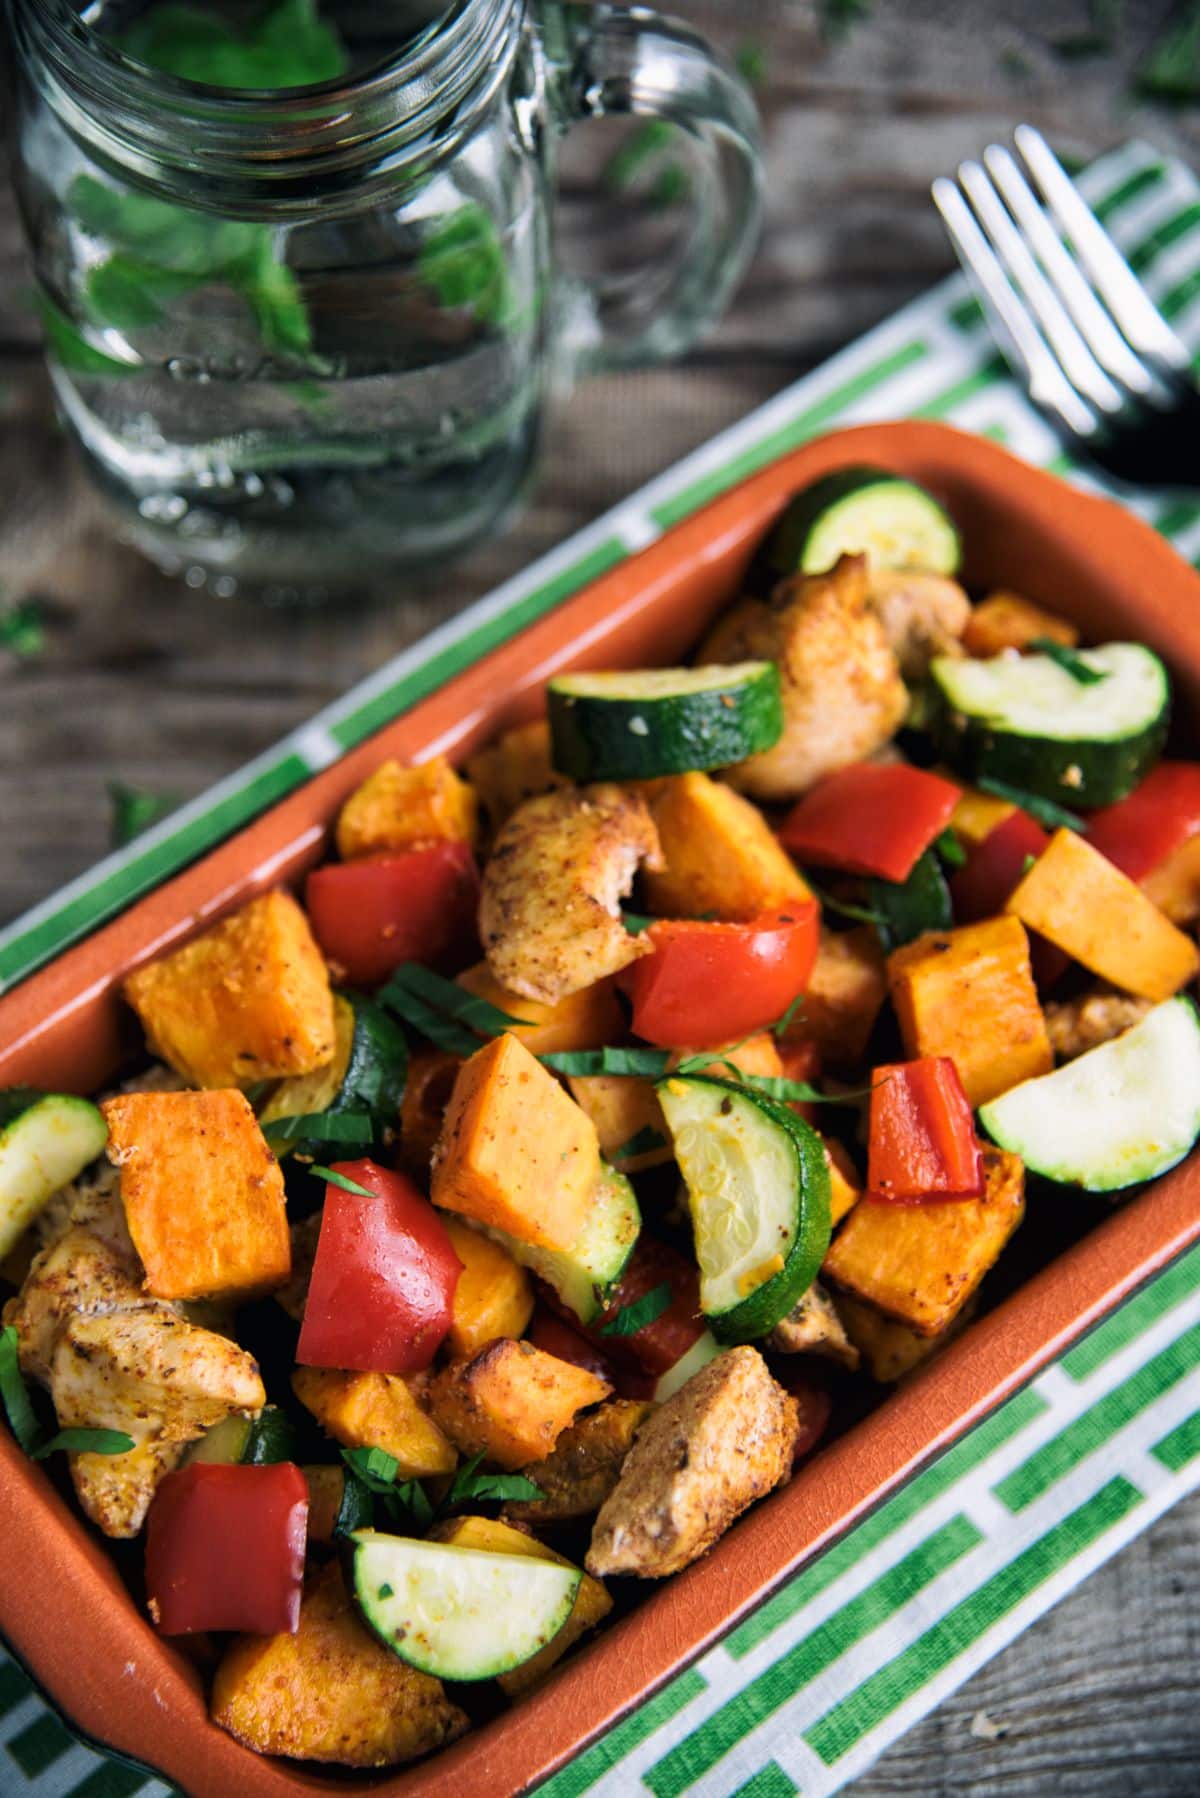 Cajun-Style Chicken With Vegetables in an orange bowl.